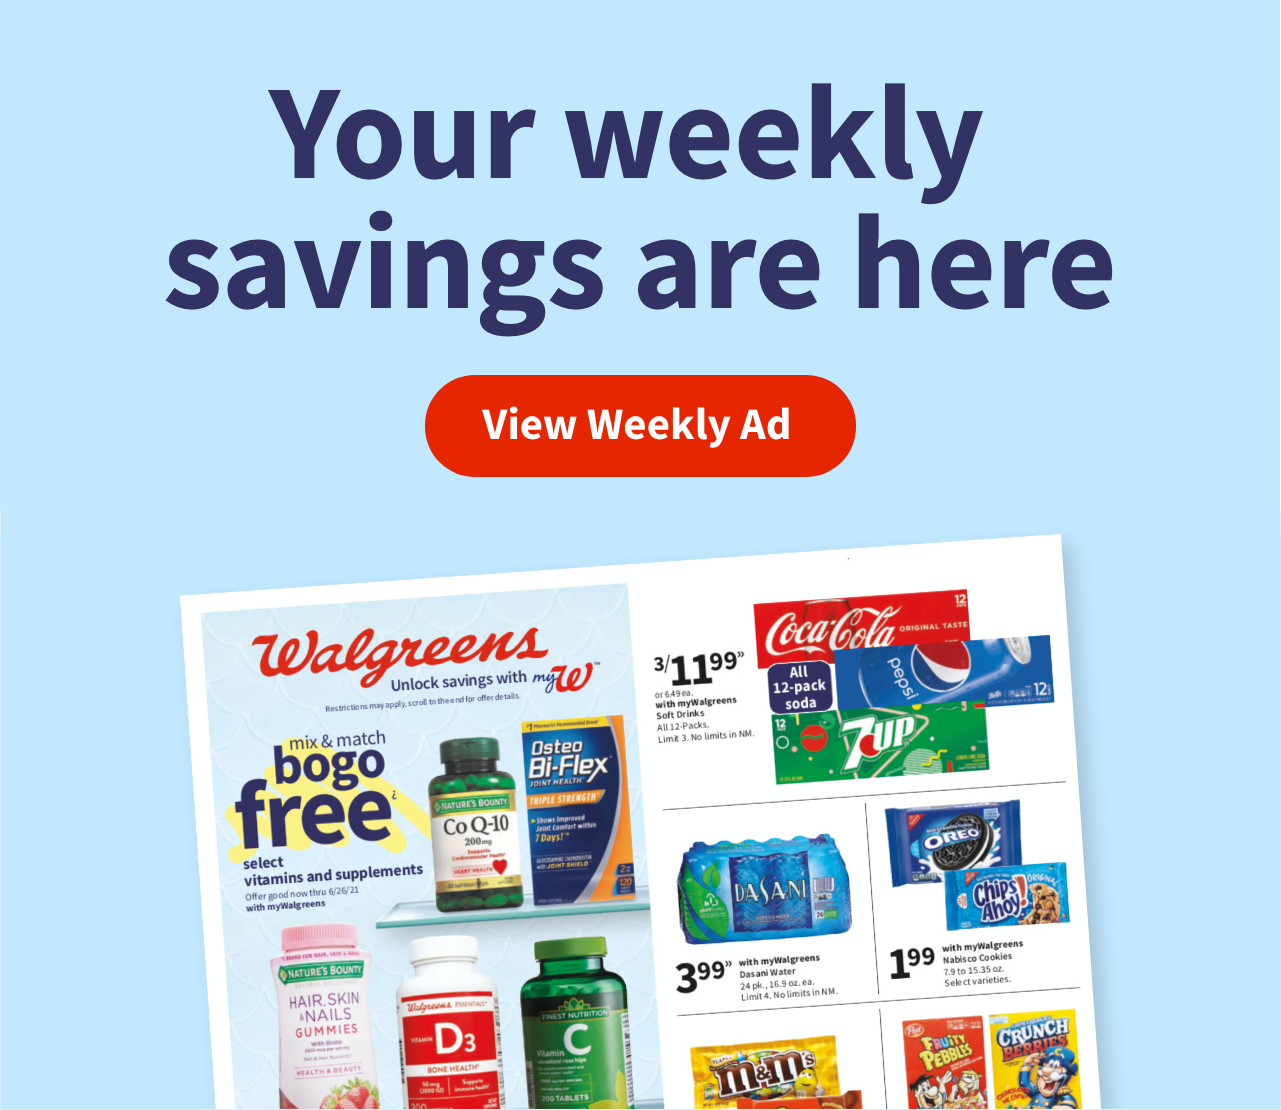 Your weekly savings are here. View Weekly Ad